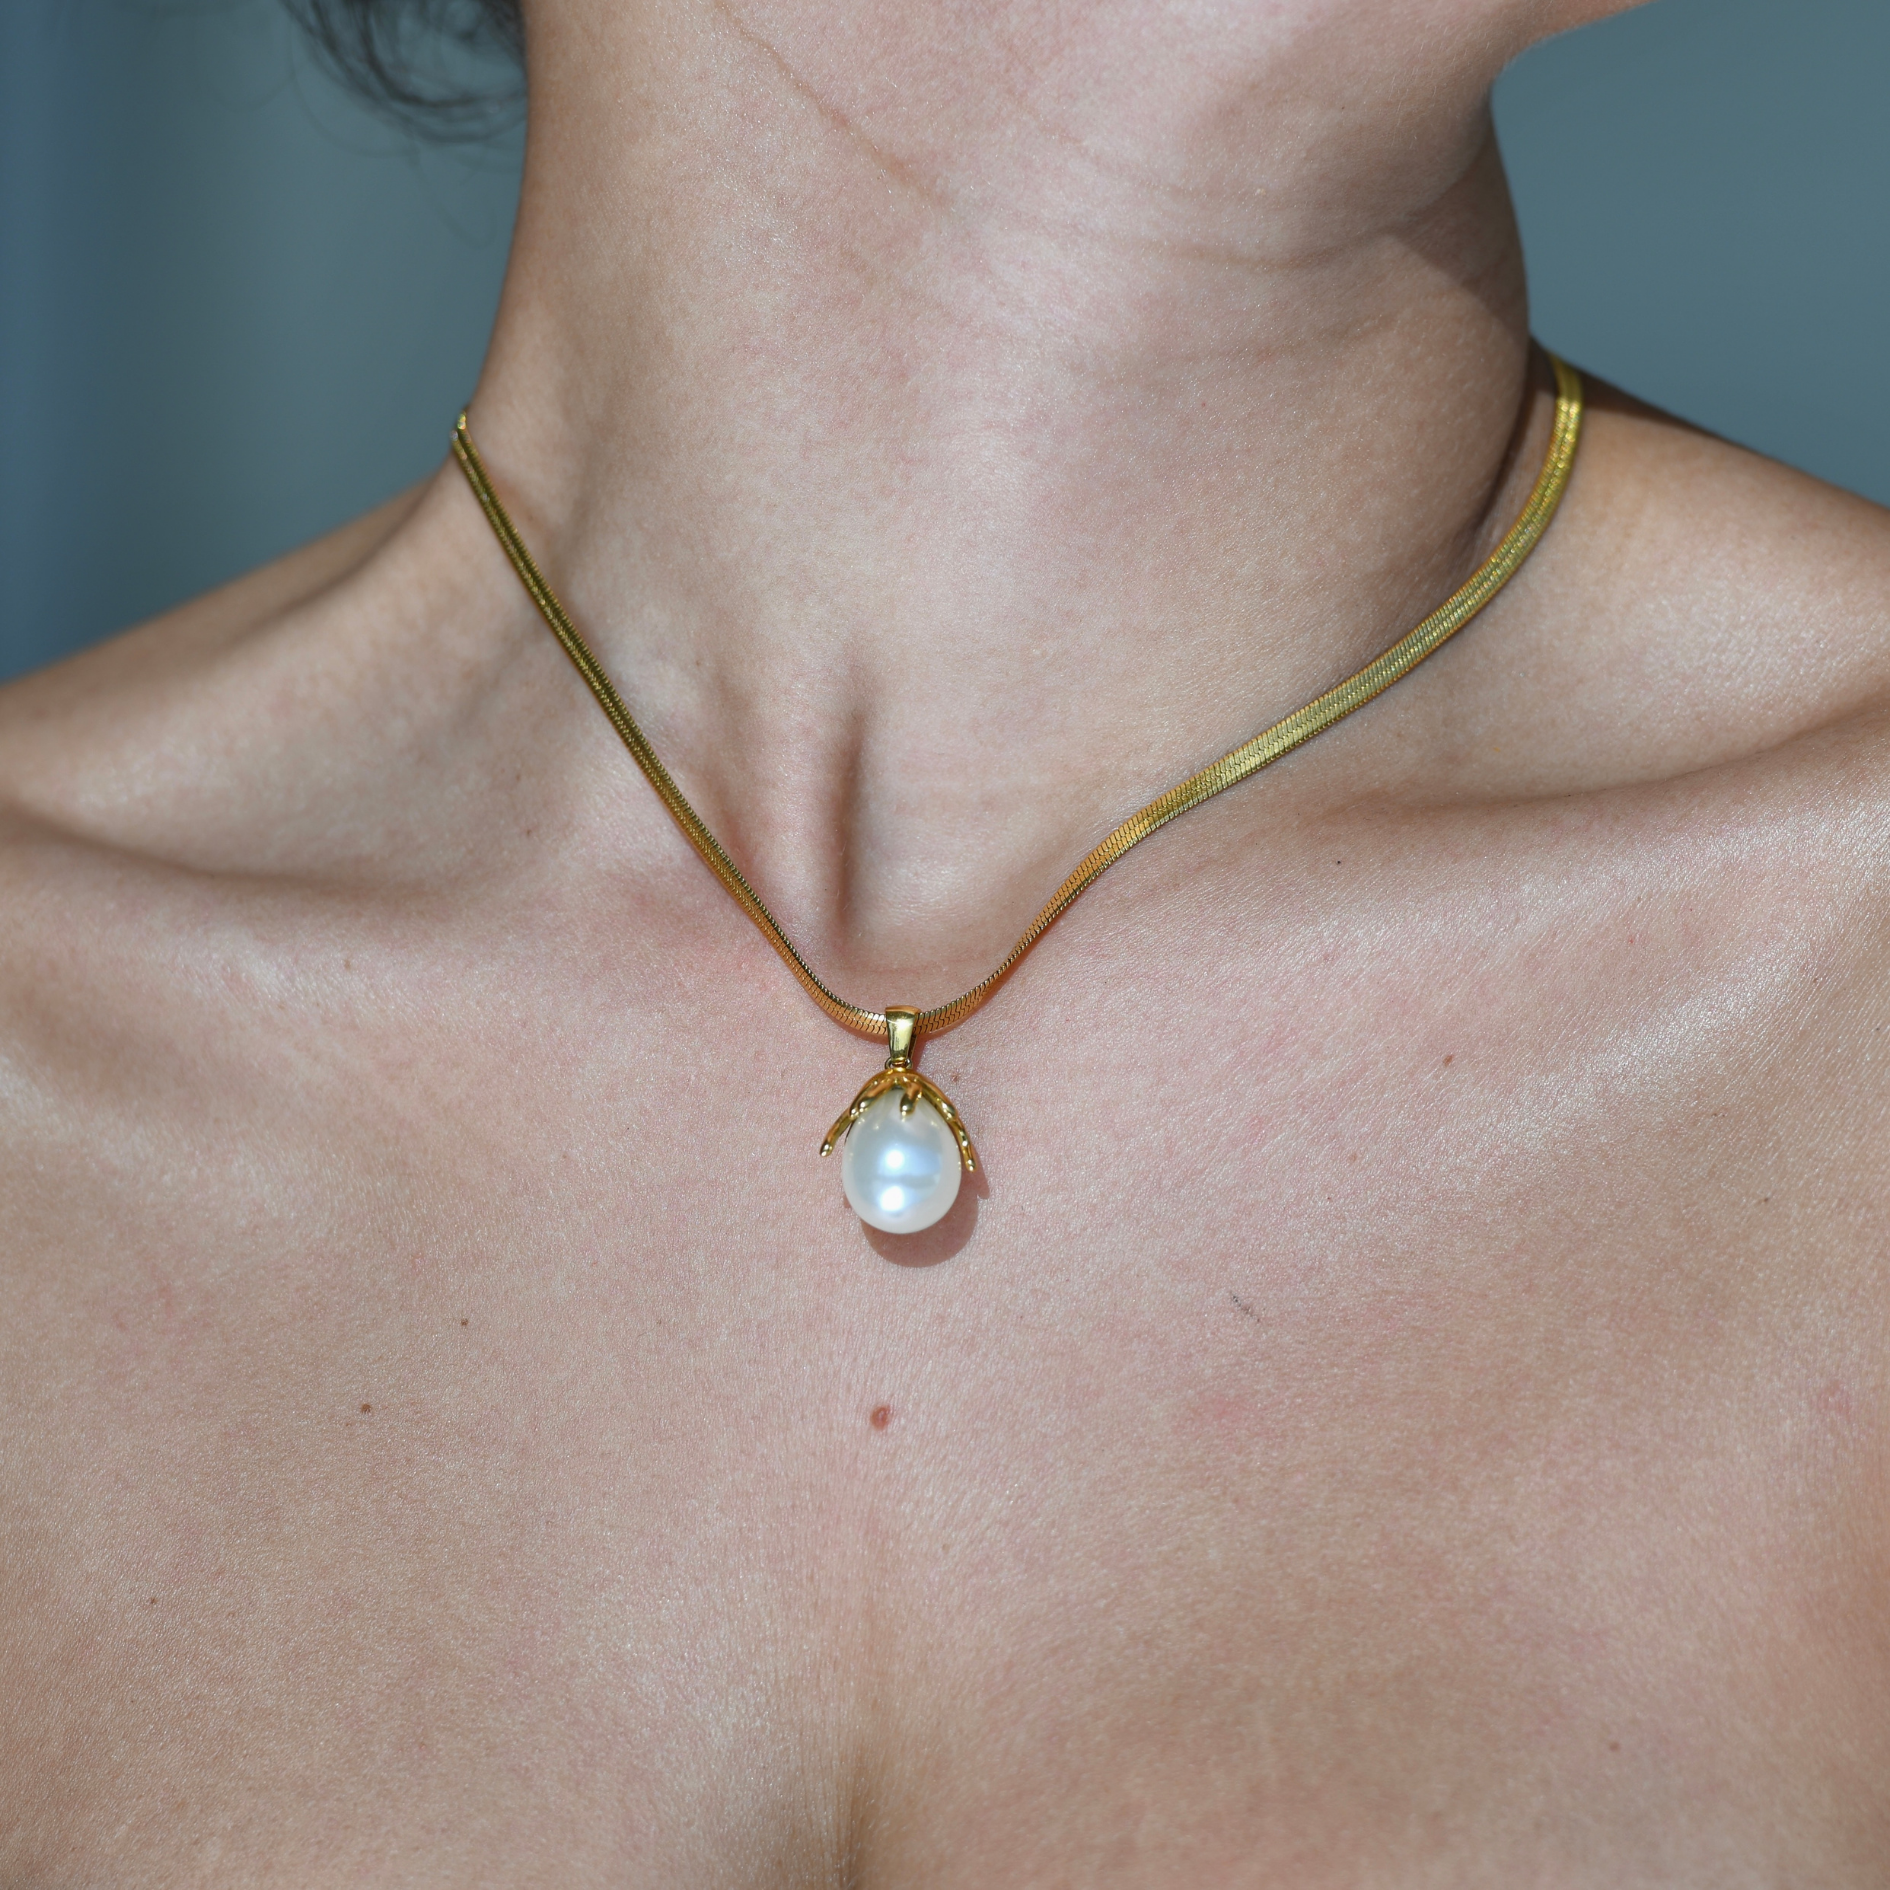 CORAL Pearl Pendant Gold Necklace - Herringbone gold chain with pearl pendant. The pearl is attched in the inside of a gold coral or flower shape metal pendant.